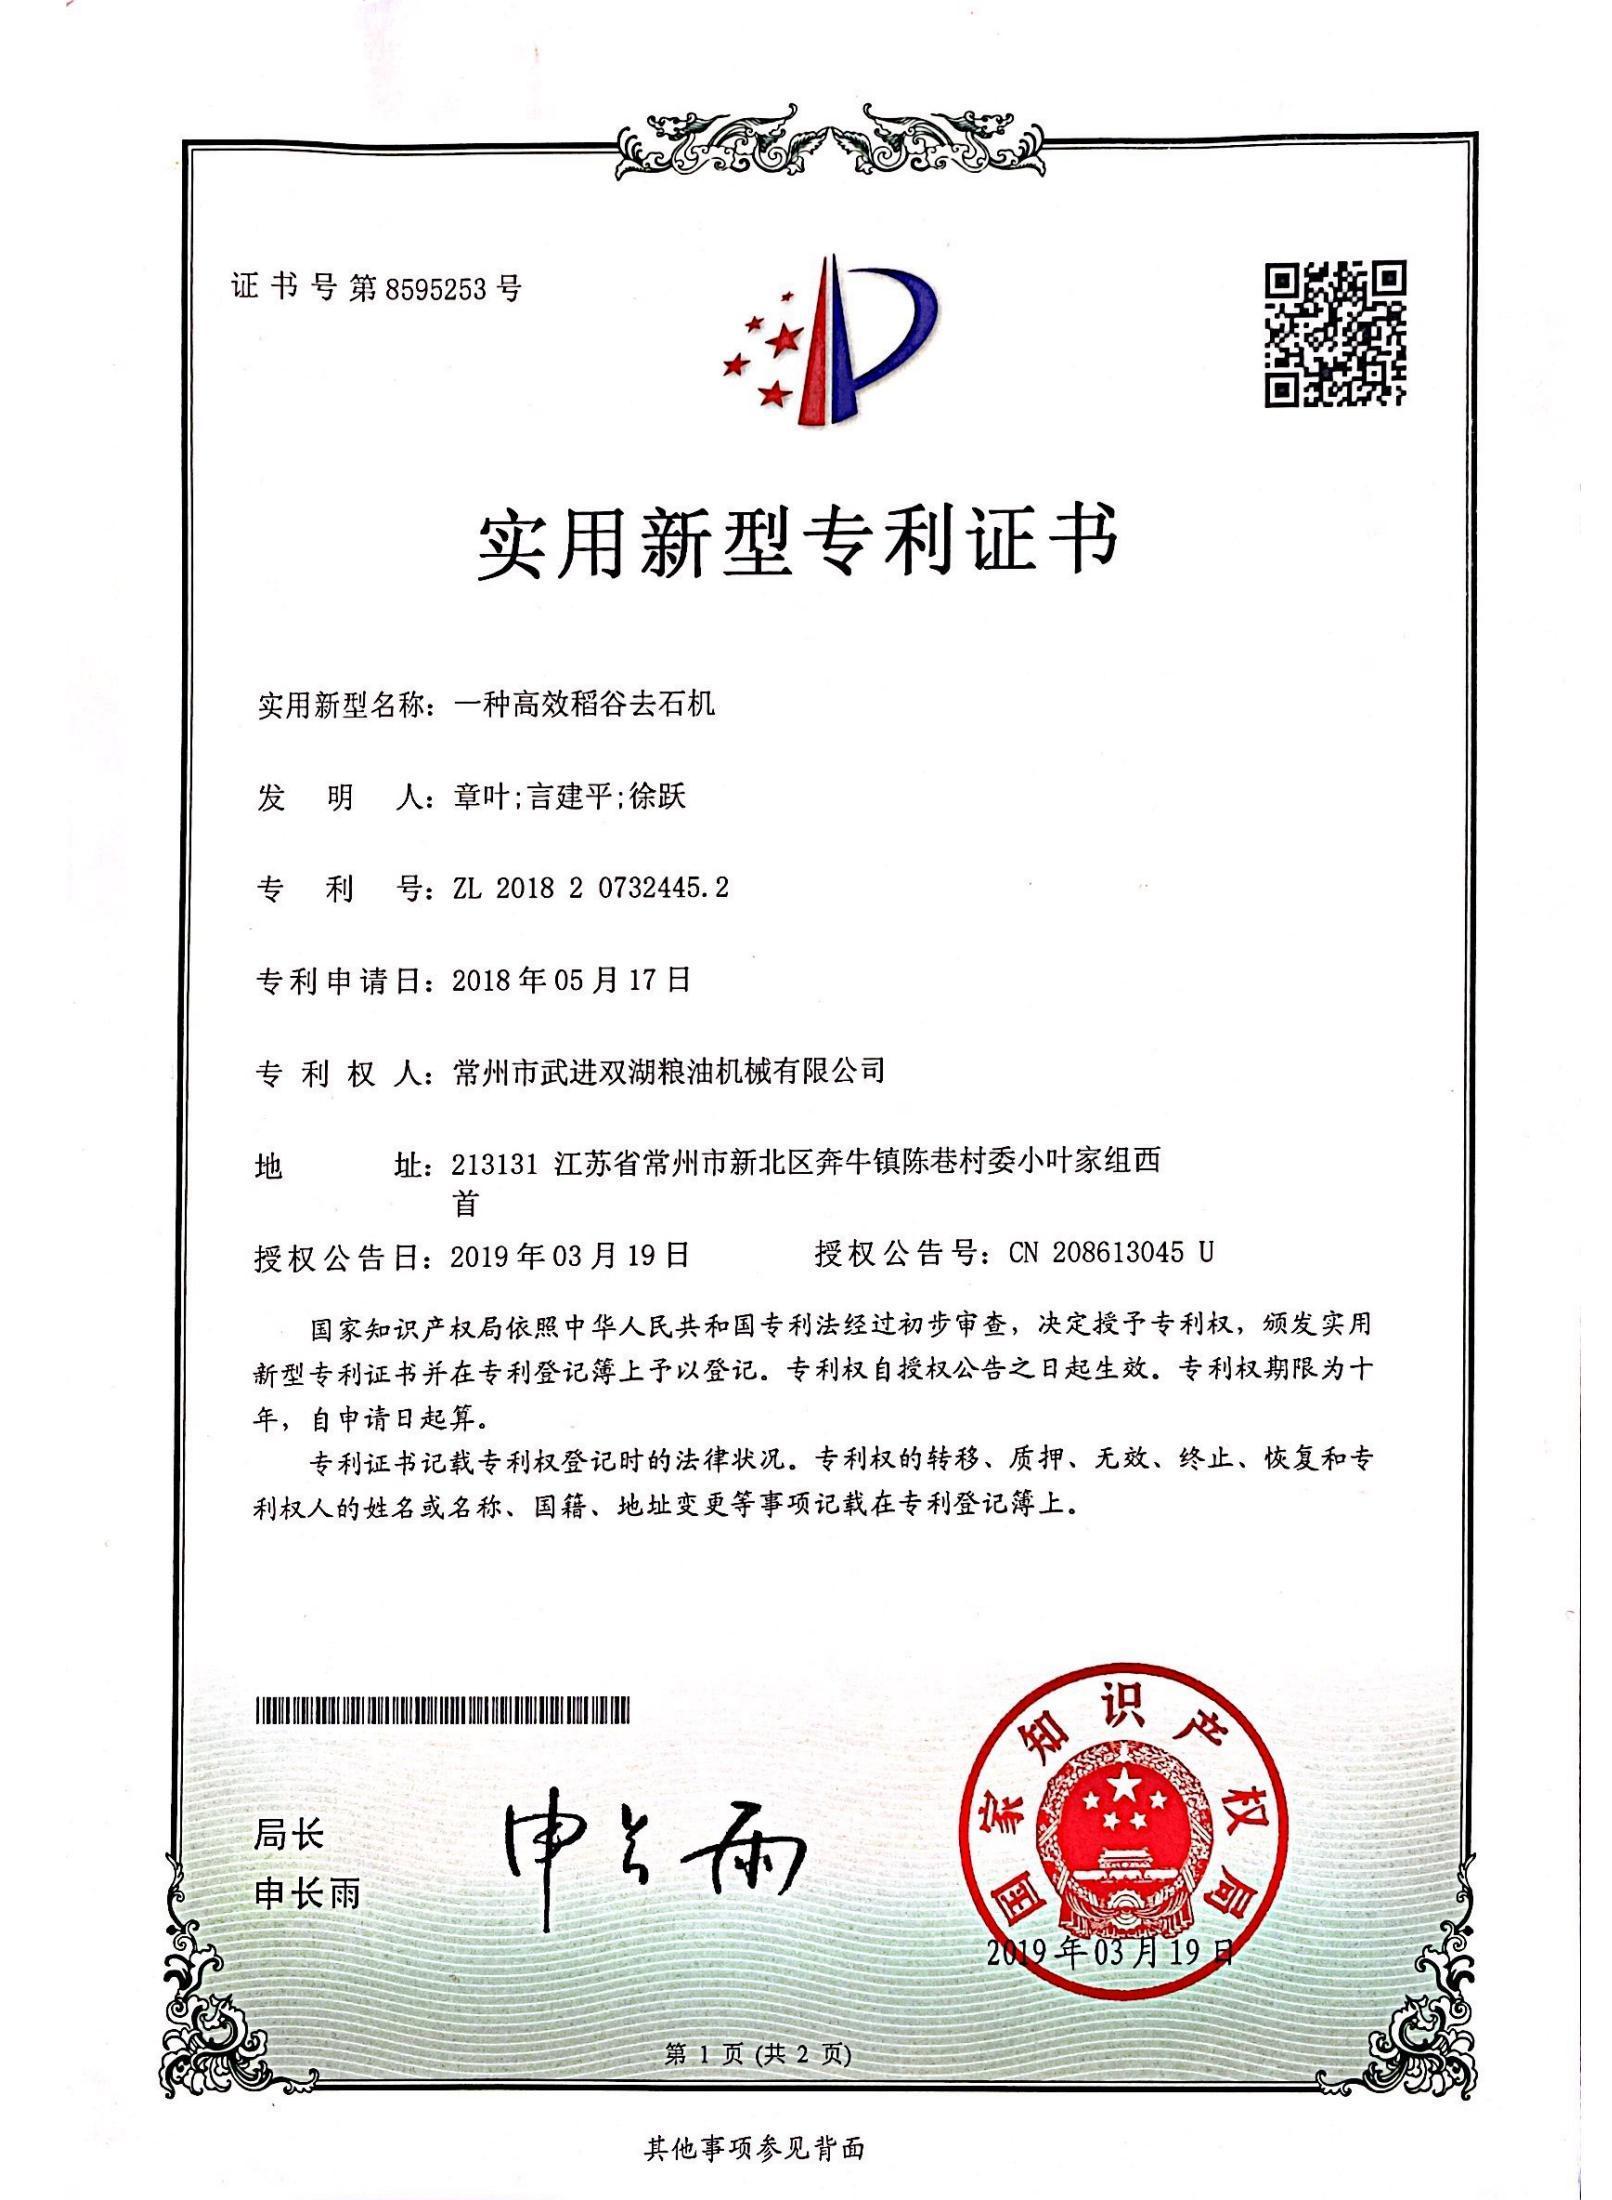 Patent certificate of an efficient rice stone removal machine